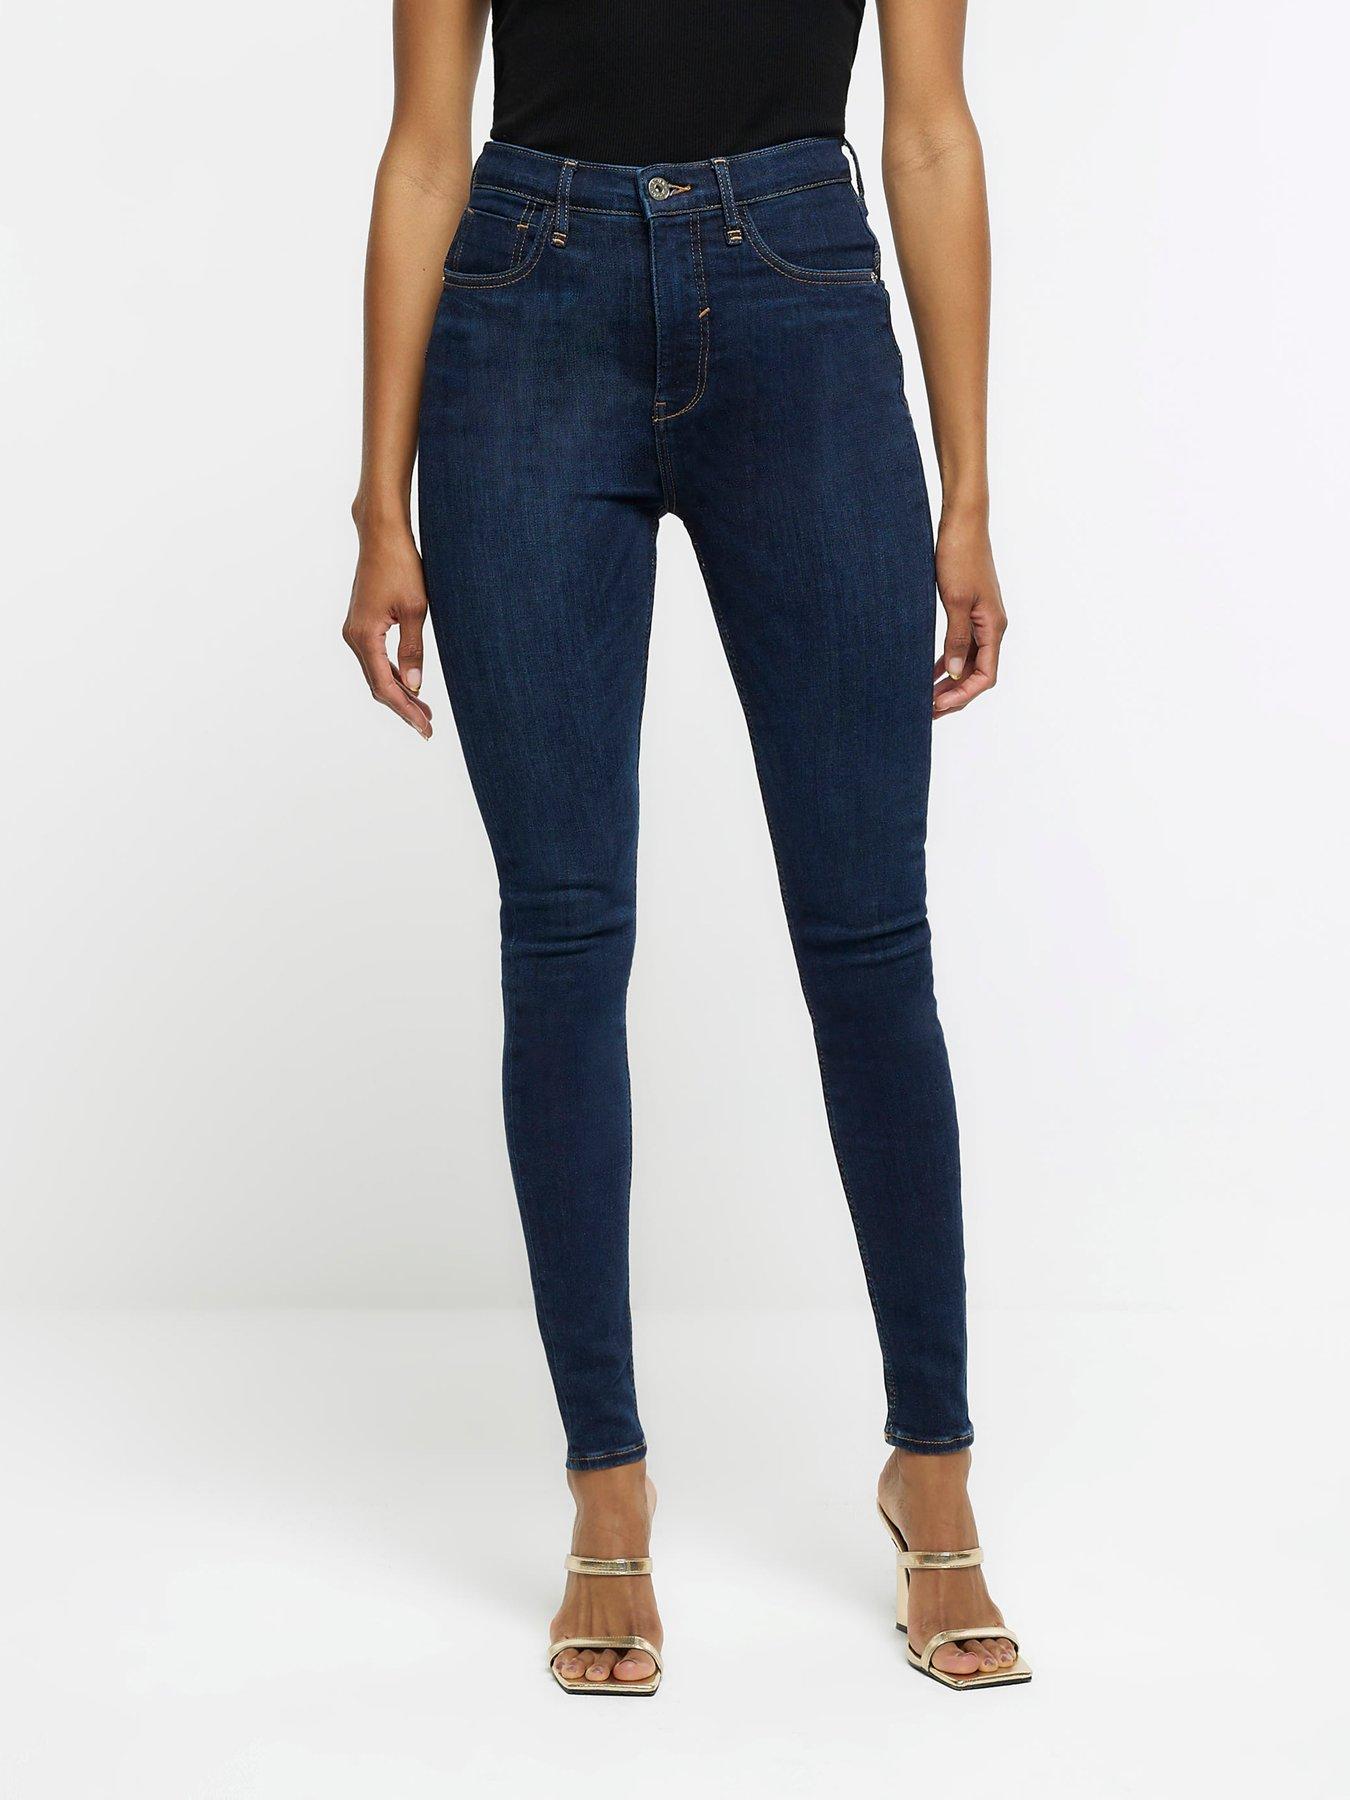 River Island Molly mid rise bum sculpt skinny jeans in black